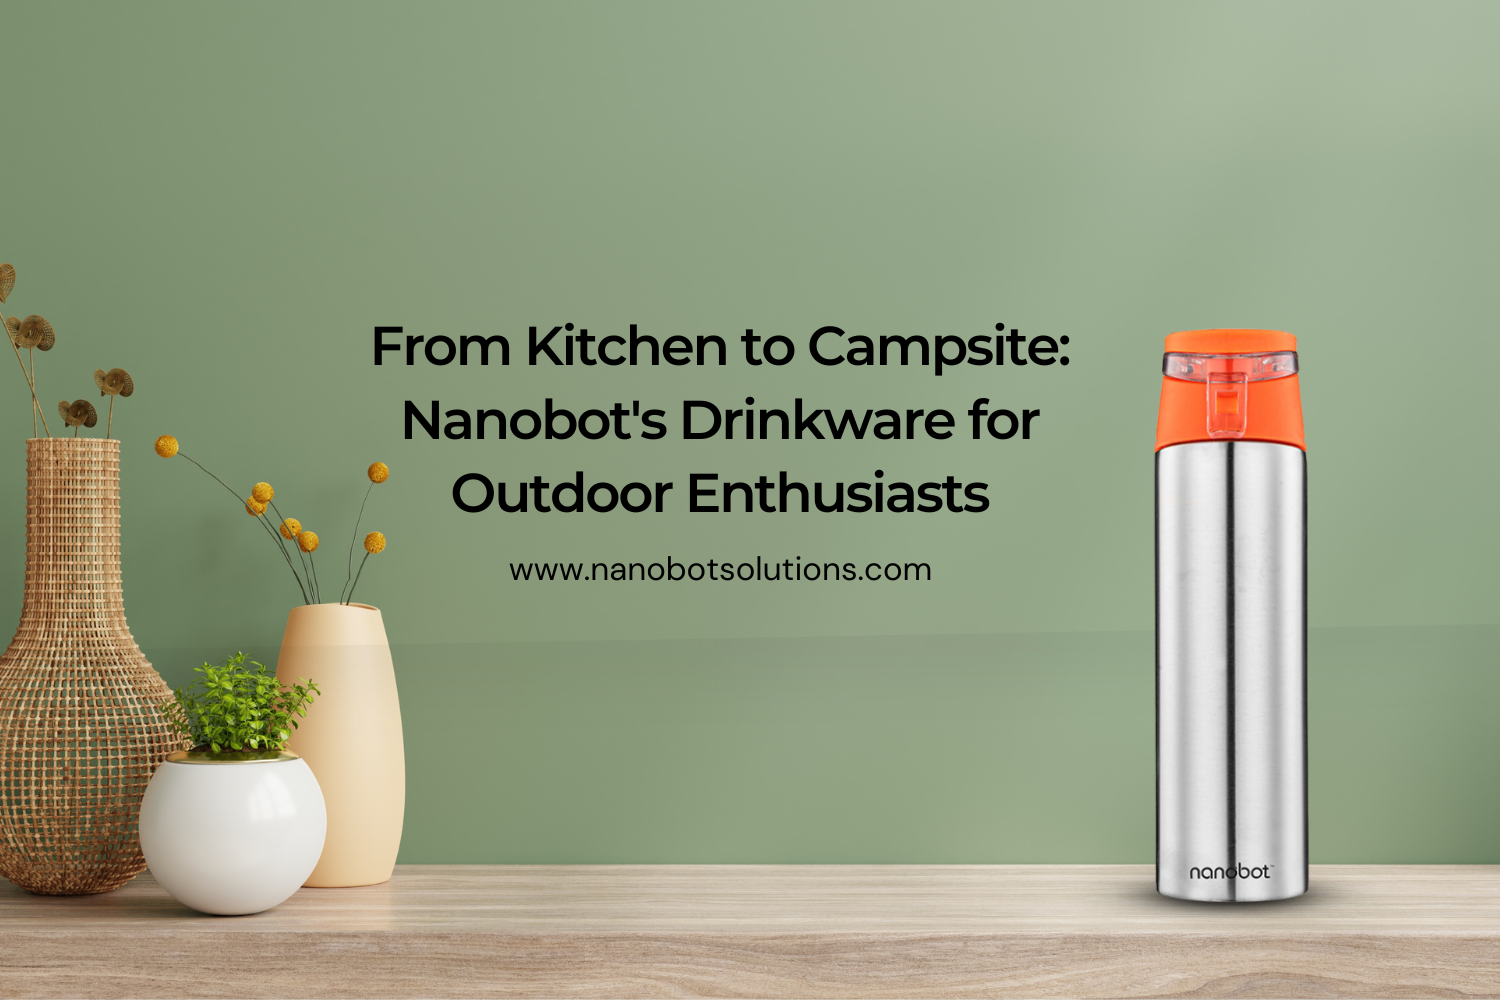 From Kitchen to Campsite Nanobot's Drinkware for Outdoor Enthusiasts